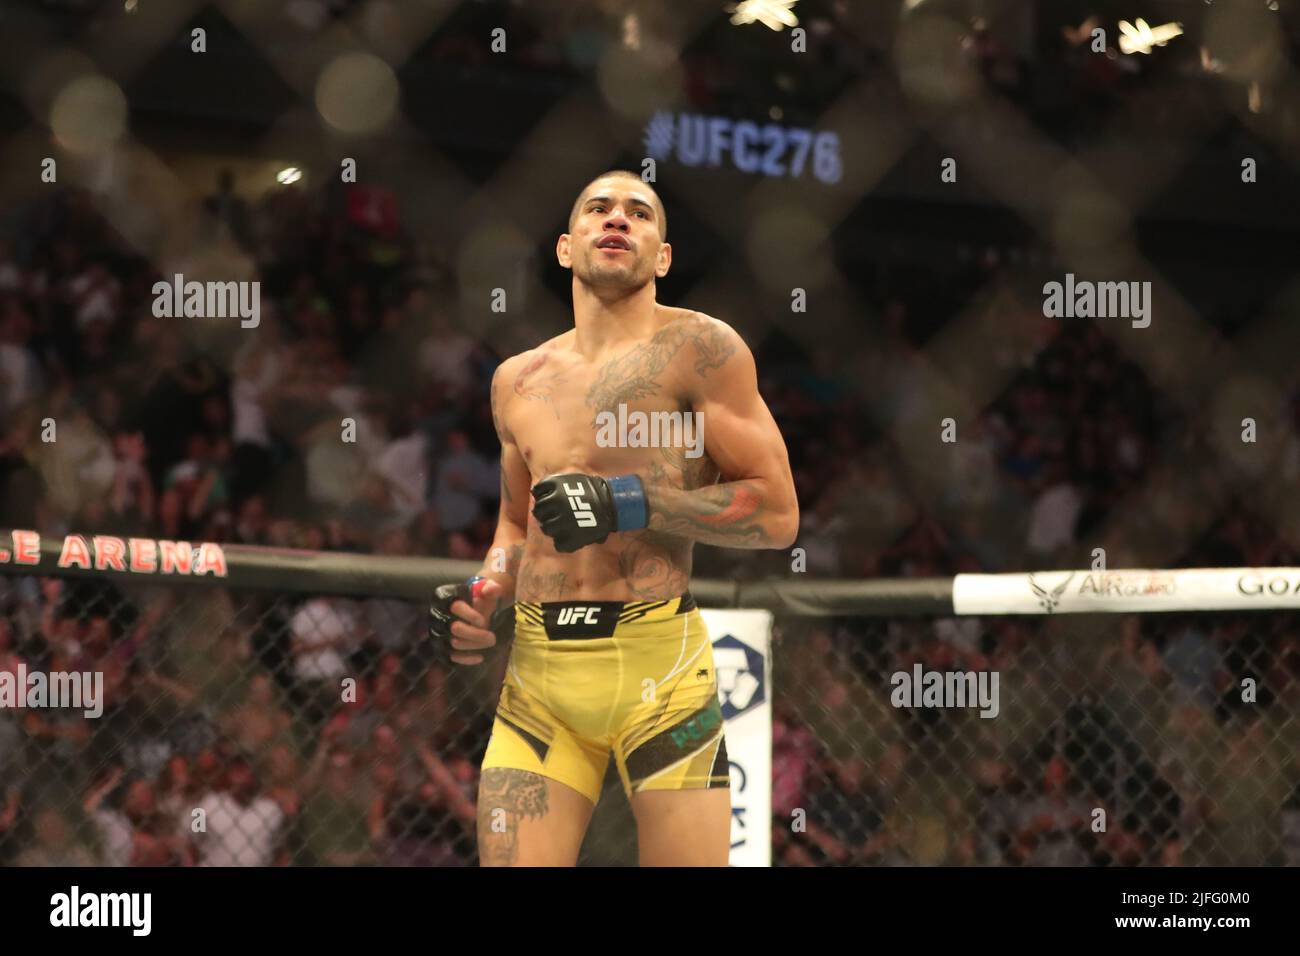 Las Vegas, United States. 02nd July, 2022. LAS VEGAS, NV - JULY 2: Alex Pereira celebrates his victory over Sean Strickland in their Middleweight bout during the UFC 276 at the T-Mobile Arena on July 2, 2022 in Las Vegas, Nevada, United States. (Photo by Alejandro Salazar/PxImages) Credit: Px Images/Alamy Live News Stock Photo